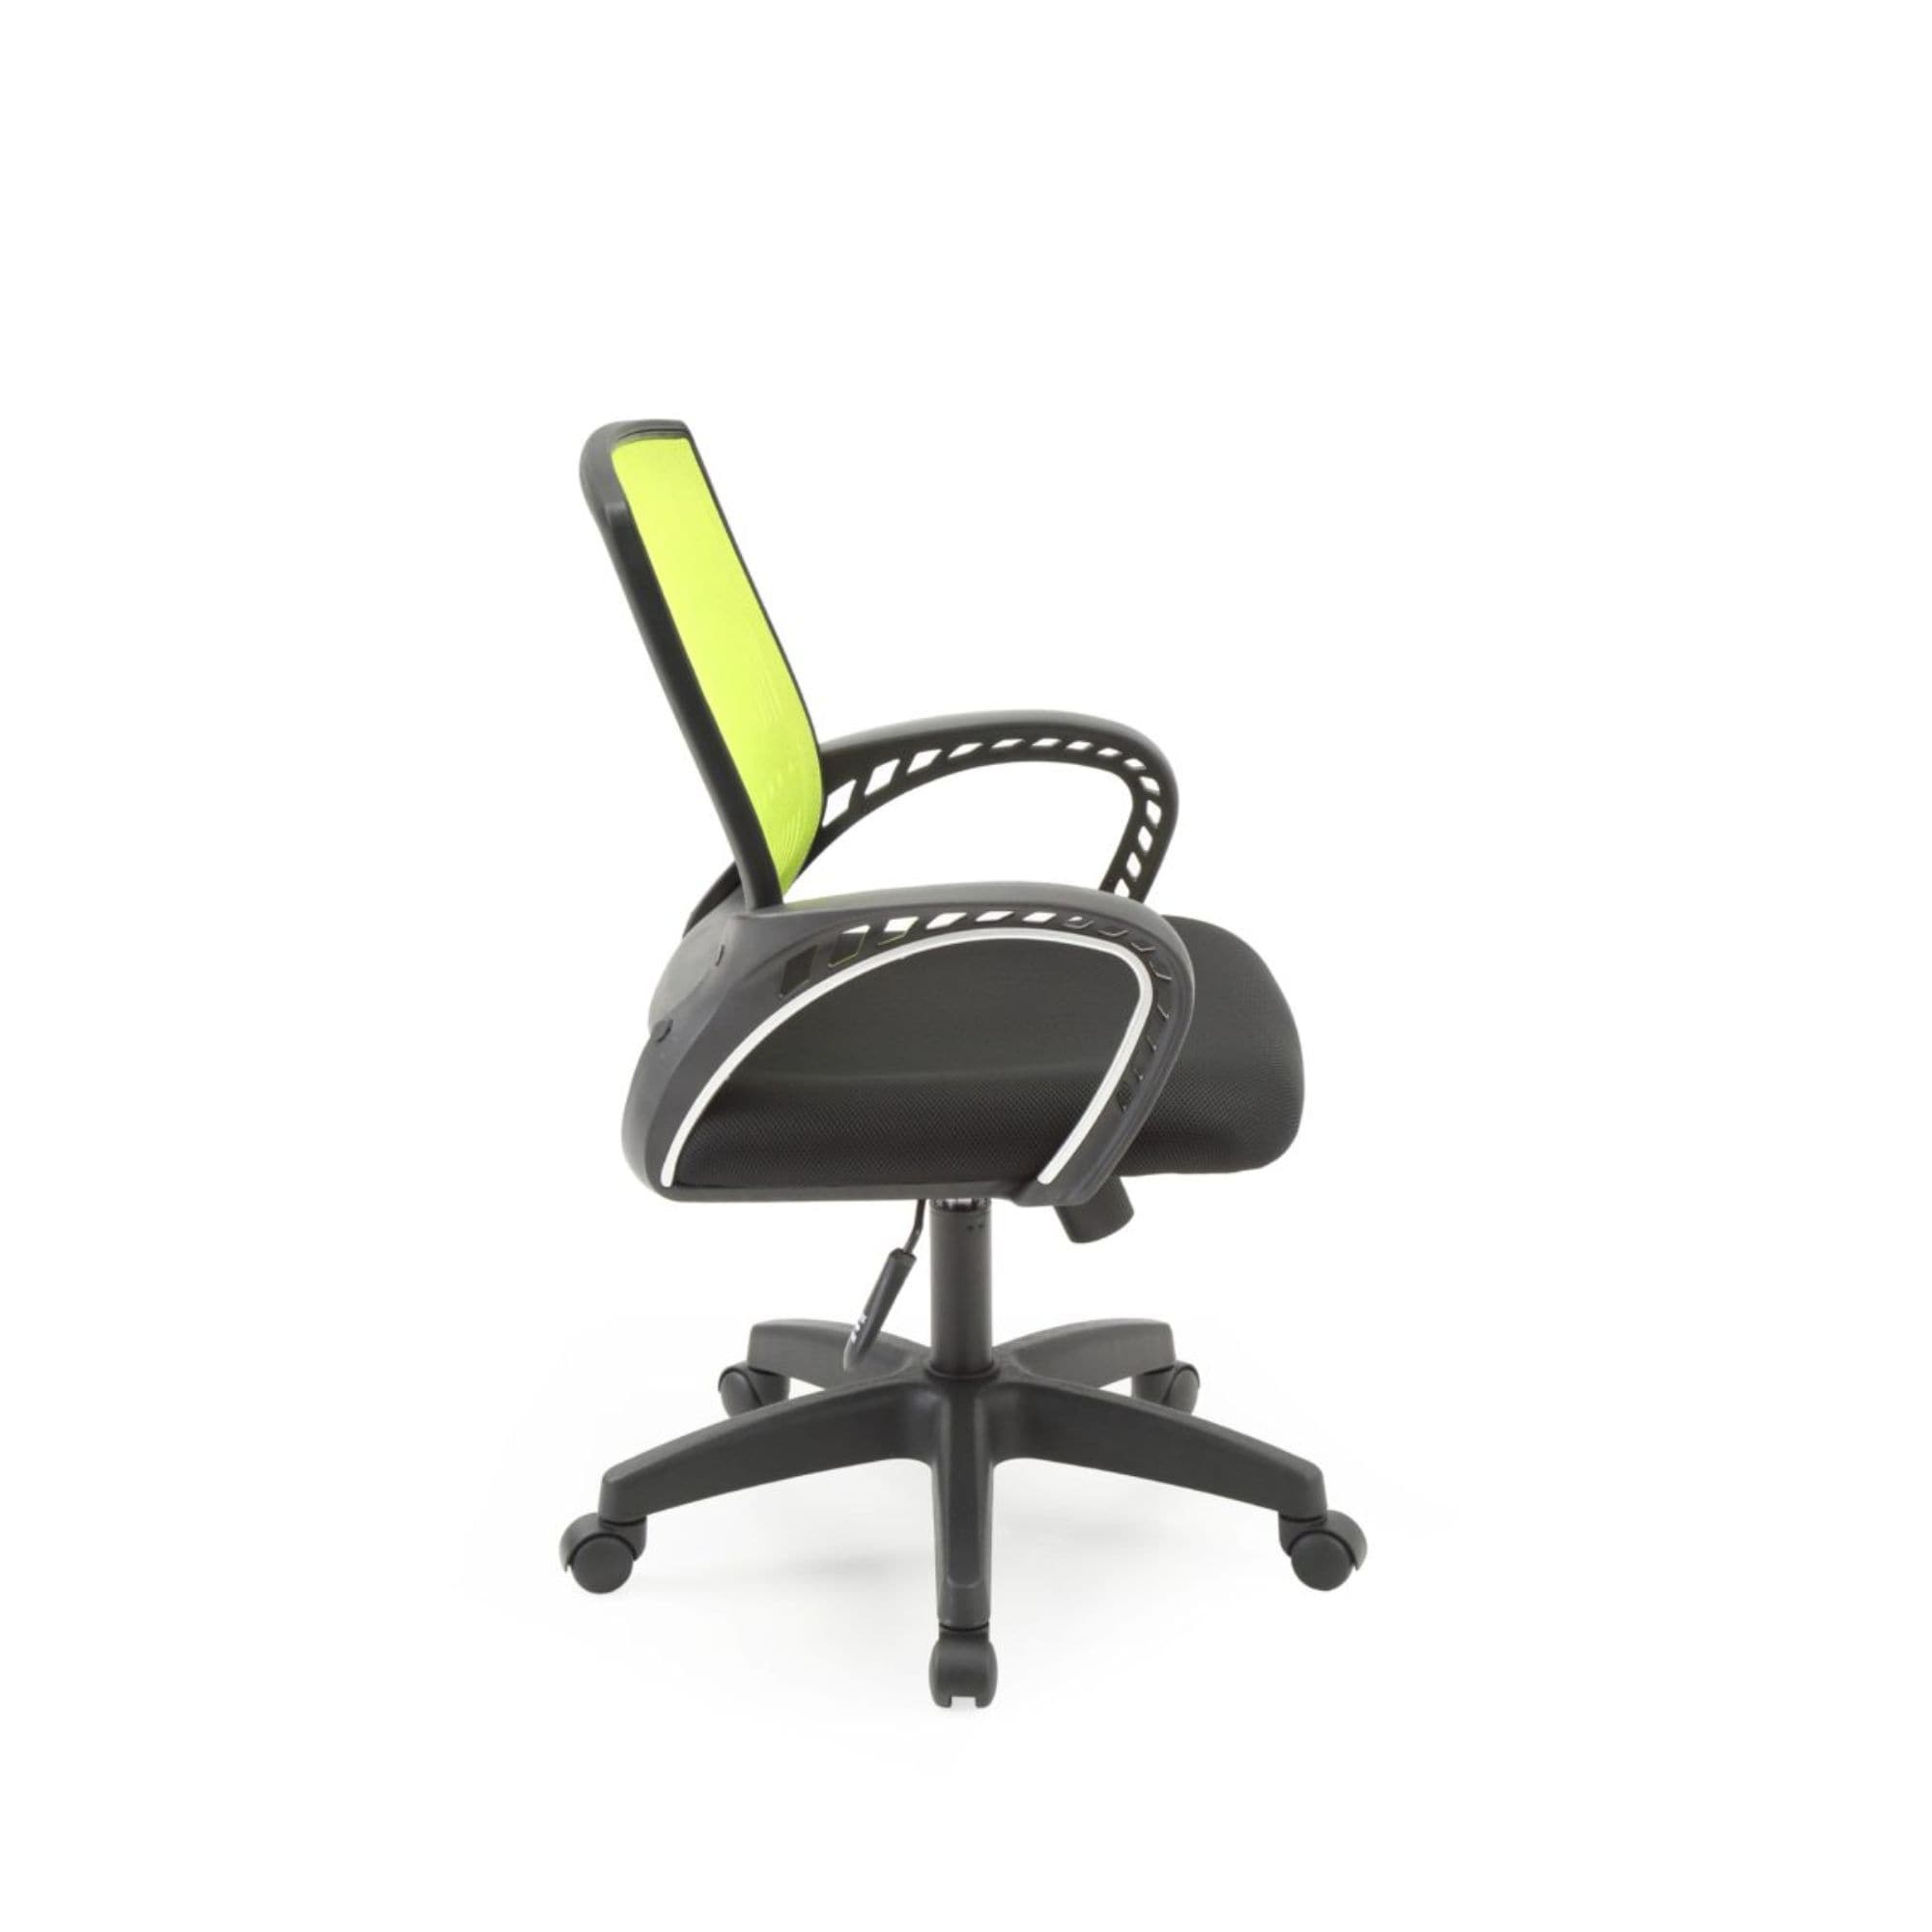 38" Green and Black Adjustable Swiveling Office Chair with Padded Seat